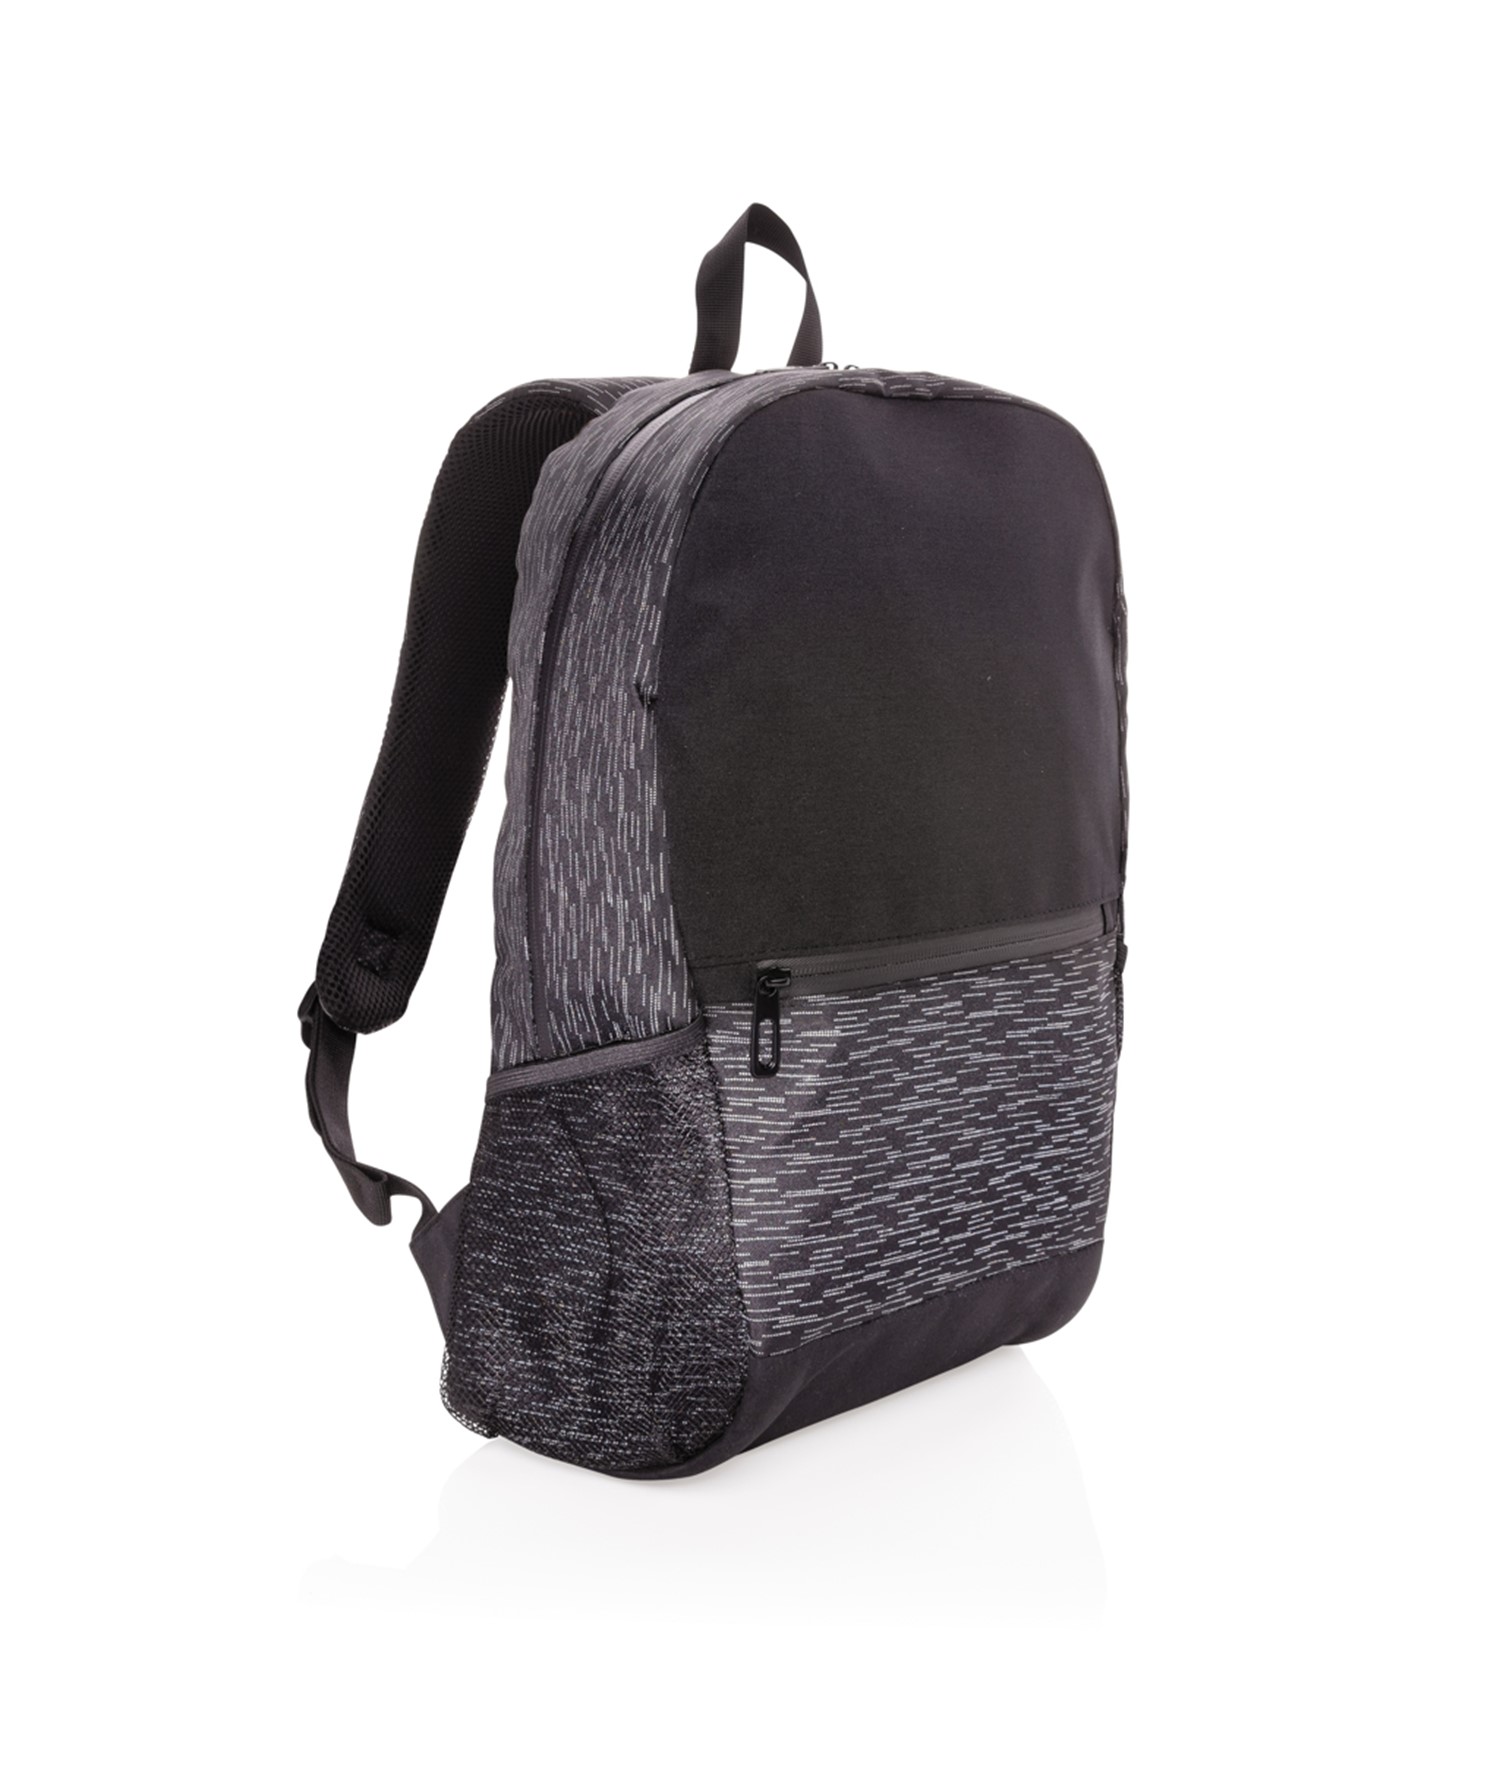 AWARE™ RPET REFLECTIVE LAPTOP BACKPACK